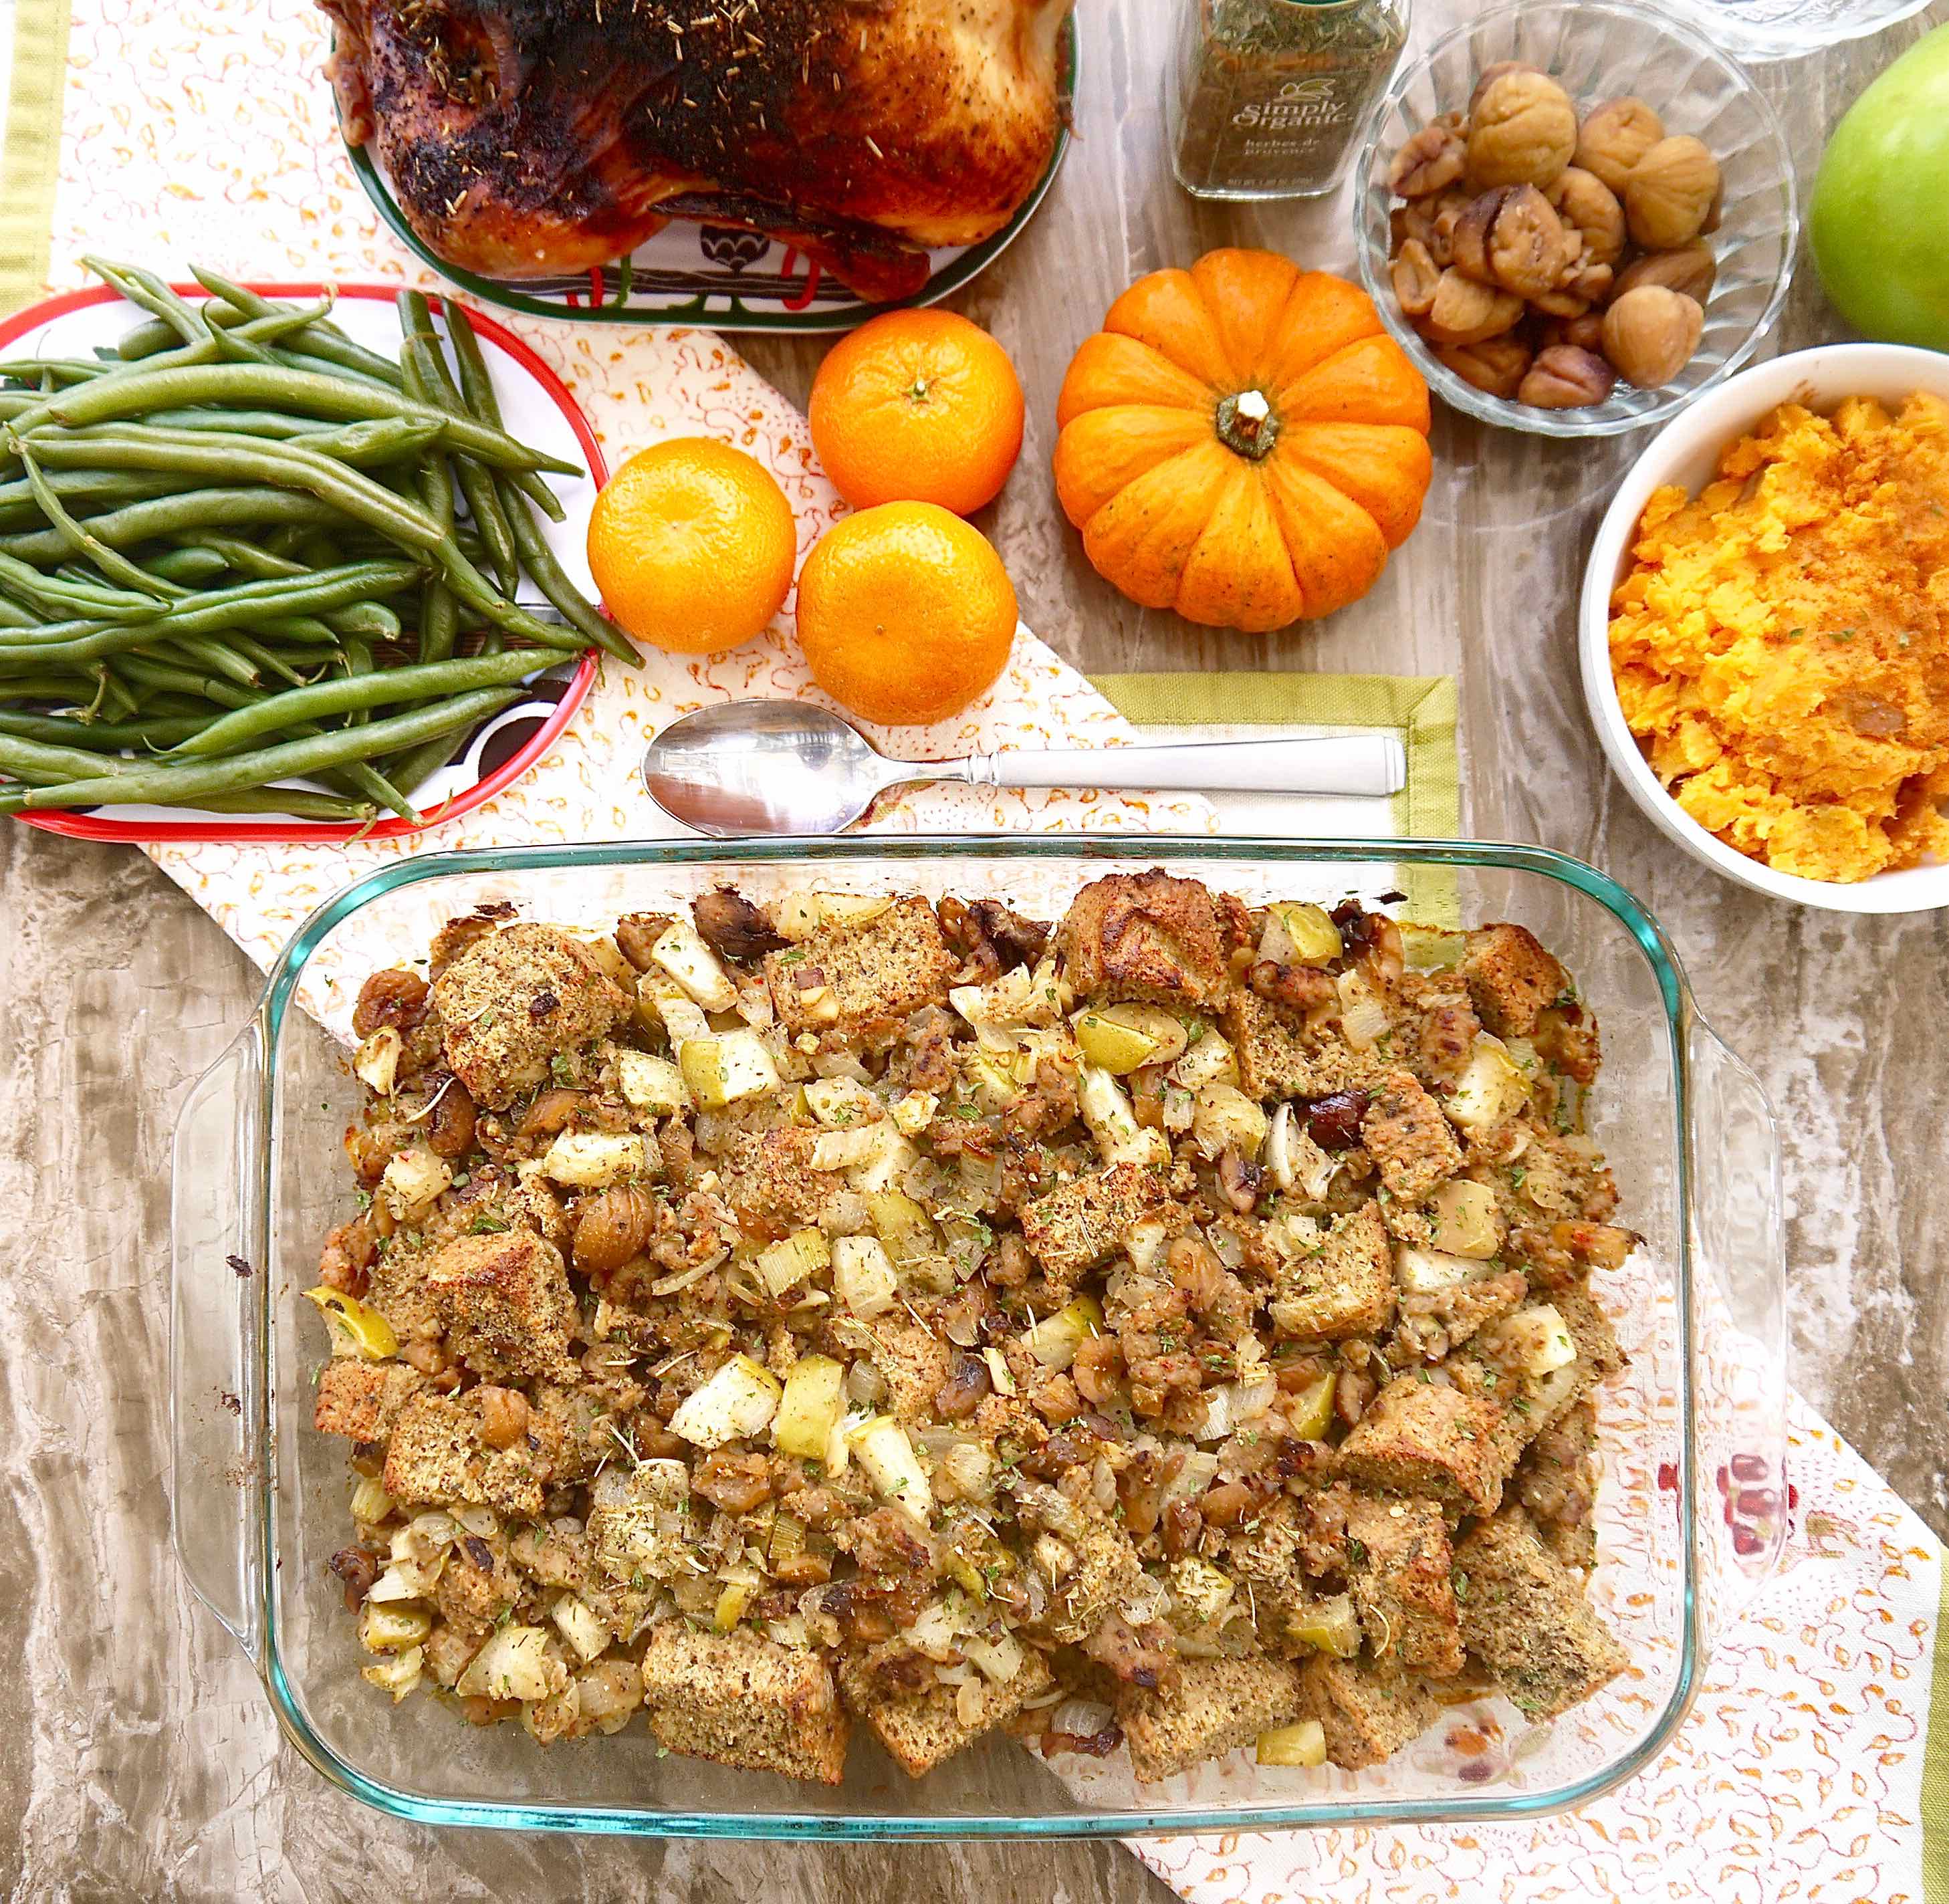 Gluten-free chestnut stuffing with sausage in a large pan, with other sides near it.